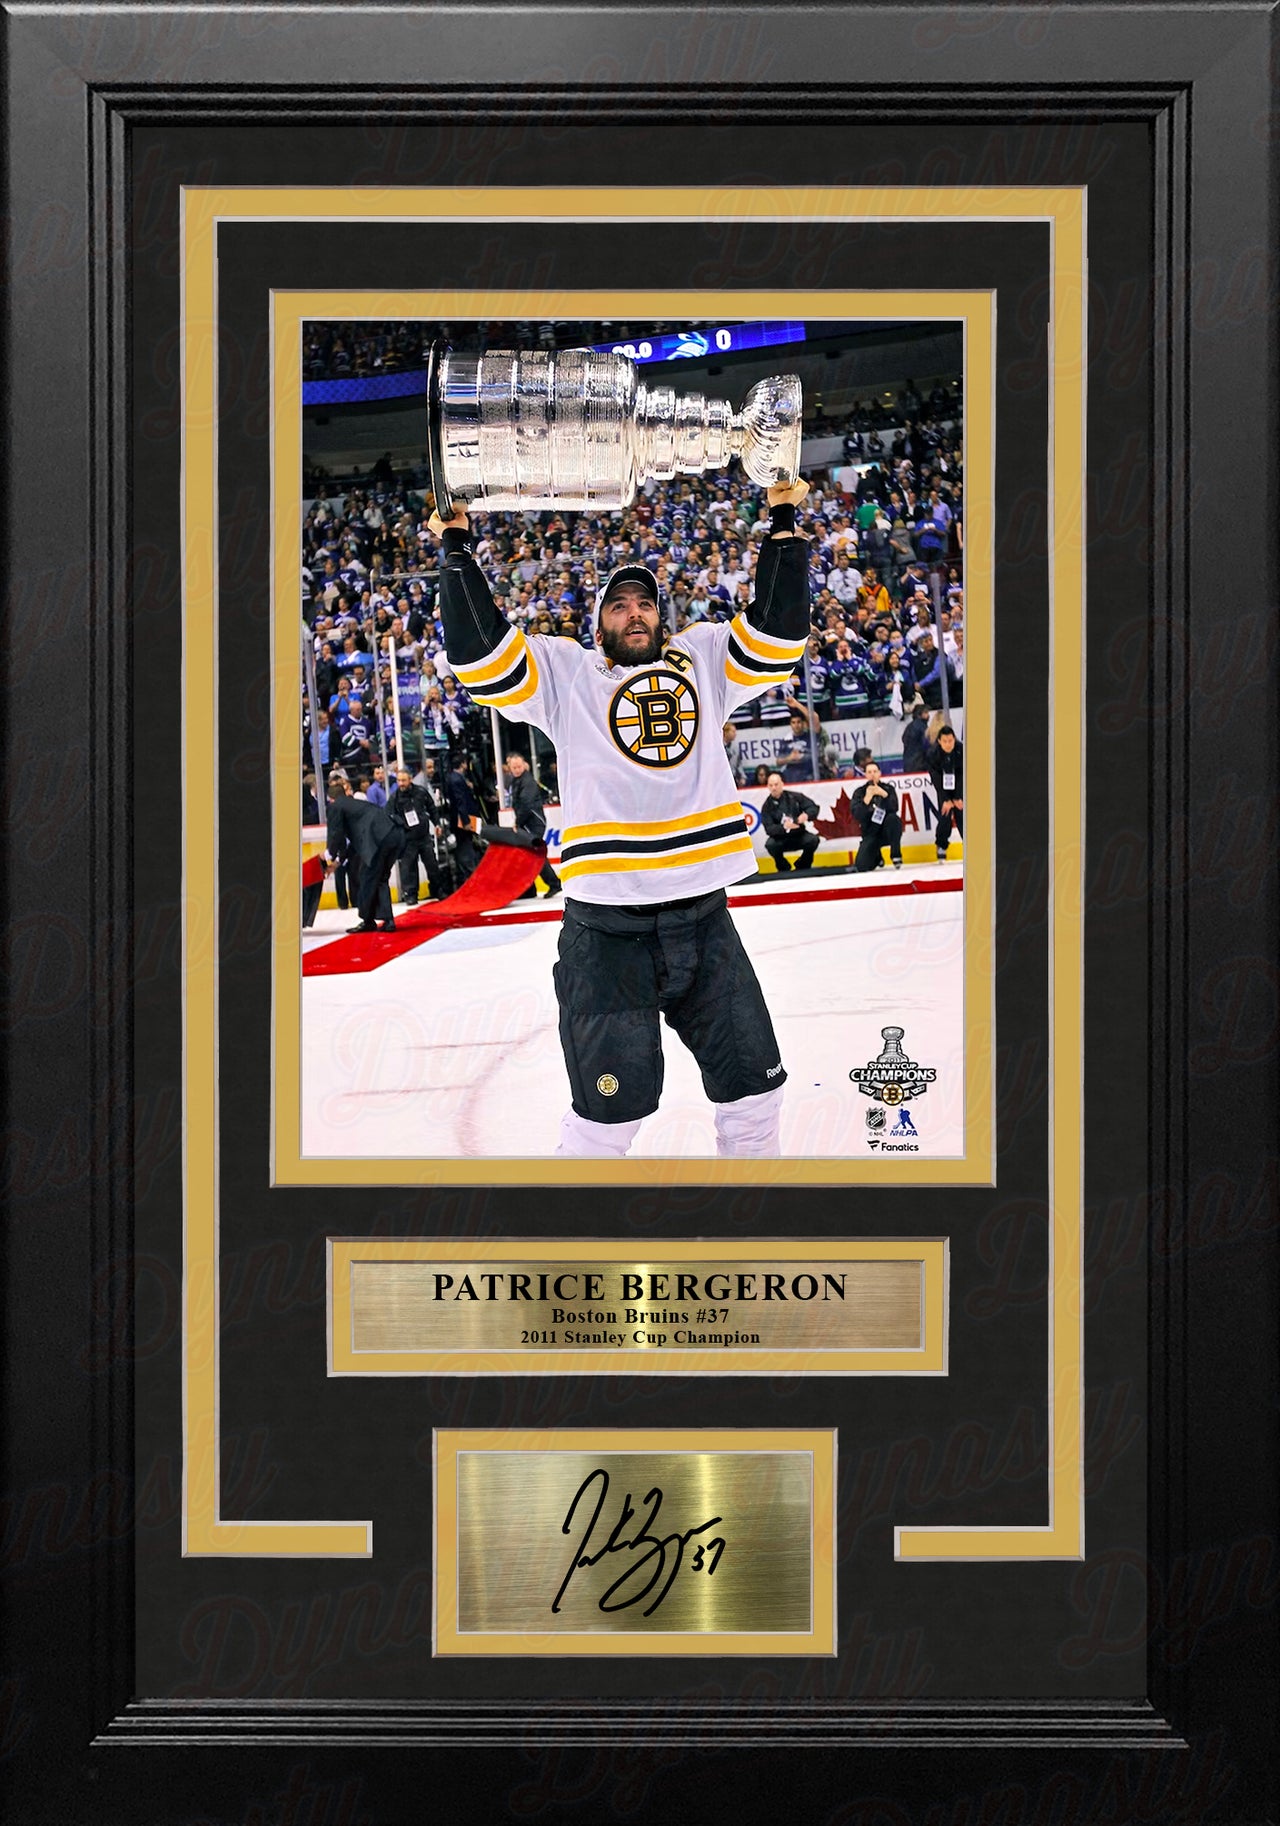 Patrice Bergeron Stanley Cup Trophy Boston Bruins 8x10 Framed Hockey Photo with Engraved Autograph